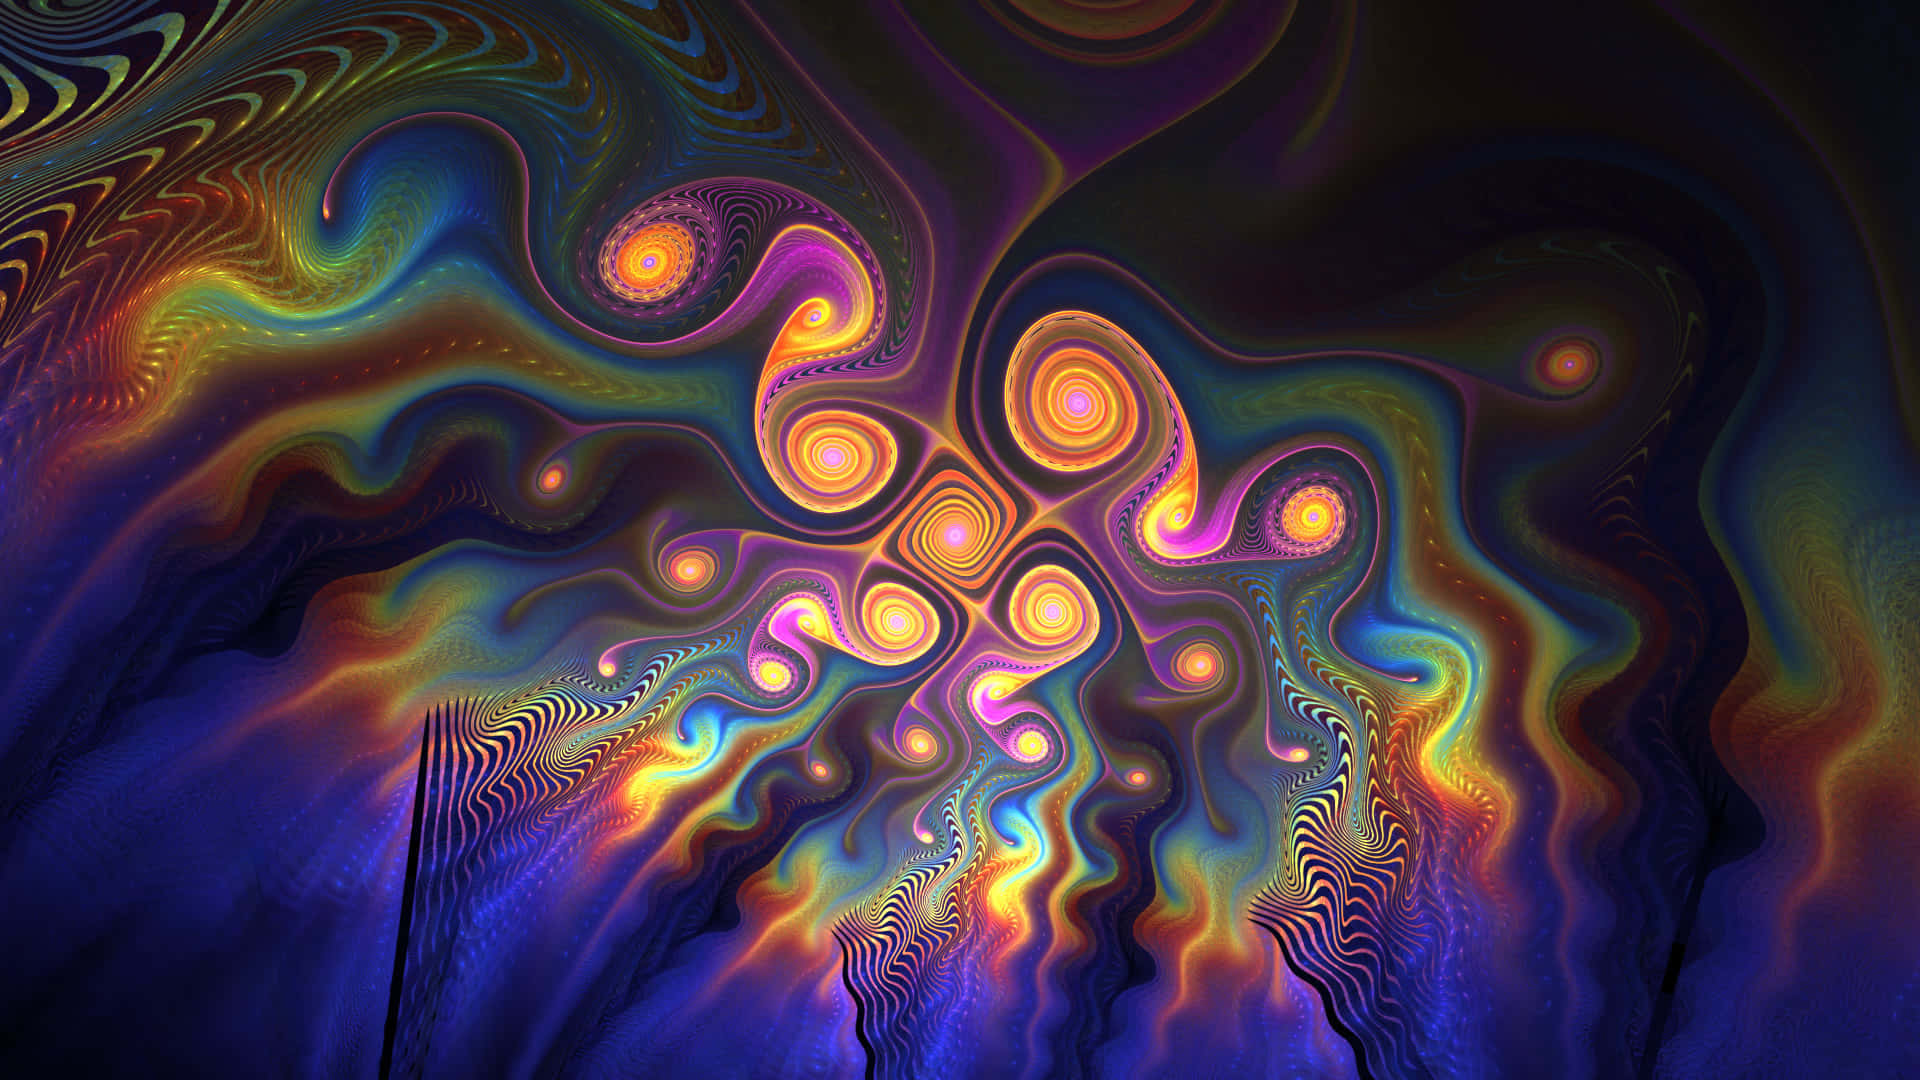 Caption: Abstract Colorful Fractal Pattern